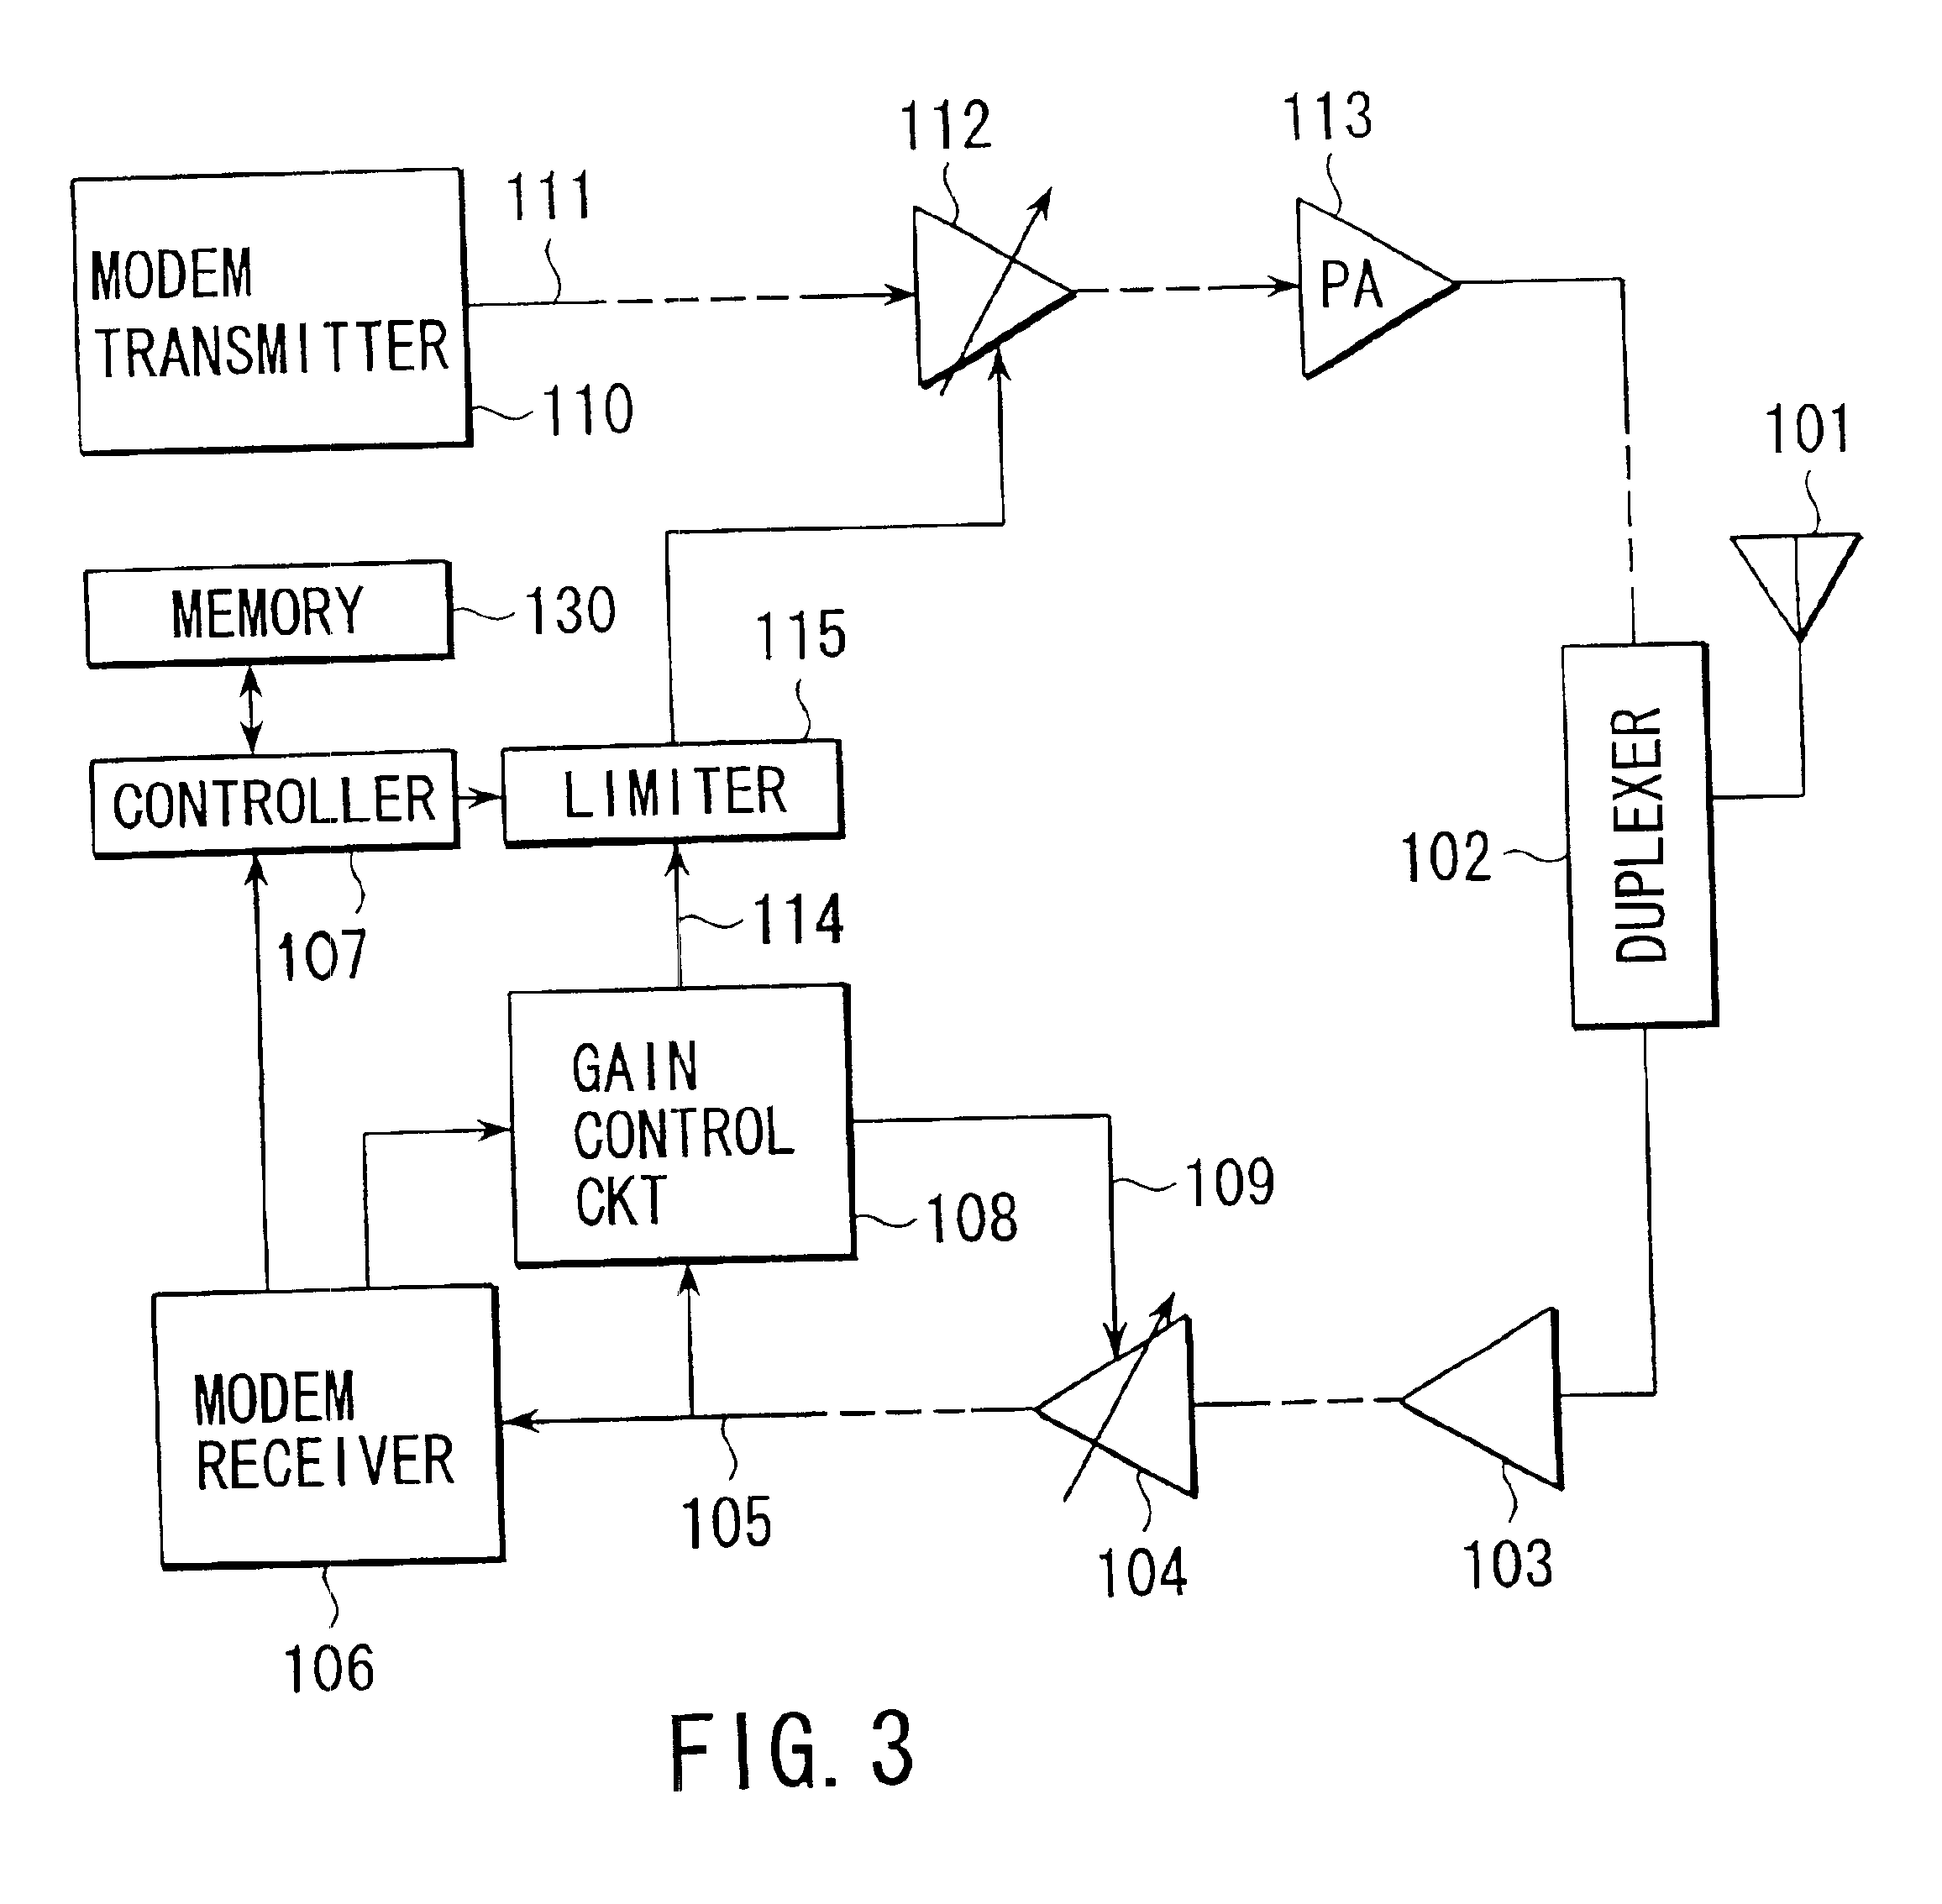 Systems and methods for controlling transmission power to reduce frequency interference